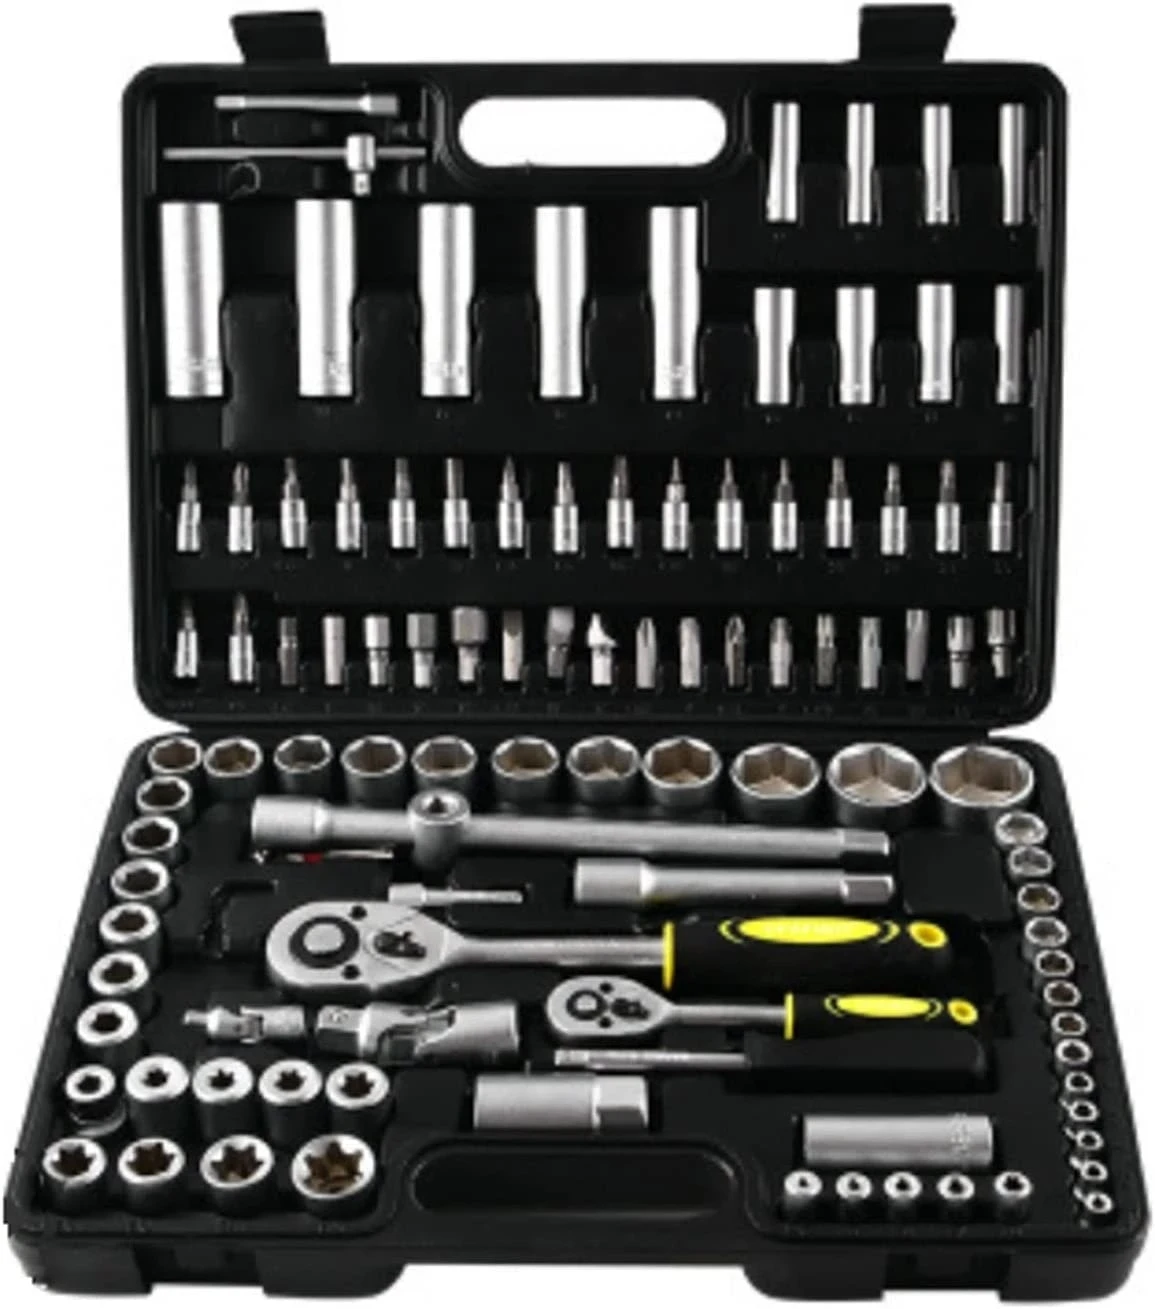 

New low price Home Tool Kit Tool Sets 108 Piece Household Hardware Socket Ratchet Handle Auto Repair Tool Combination Package